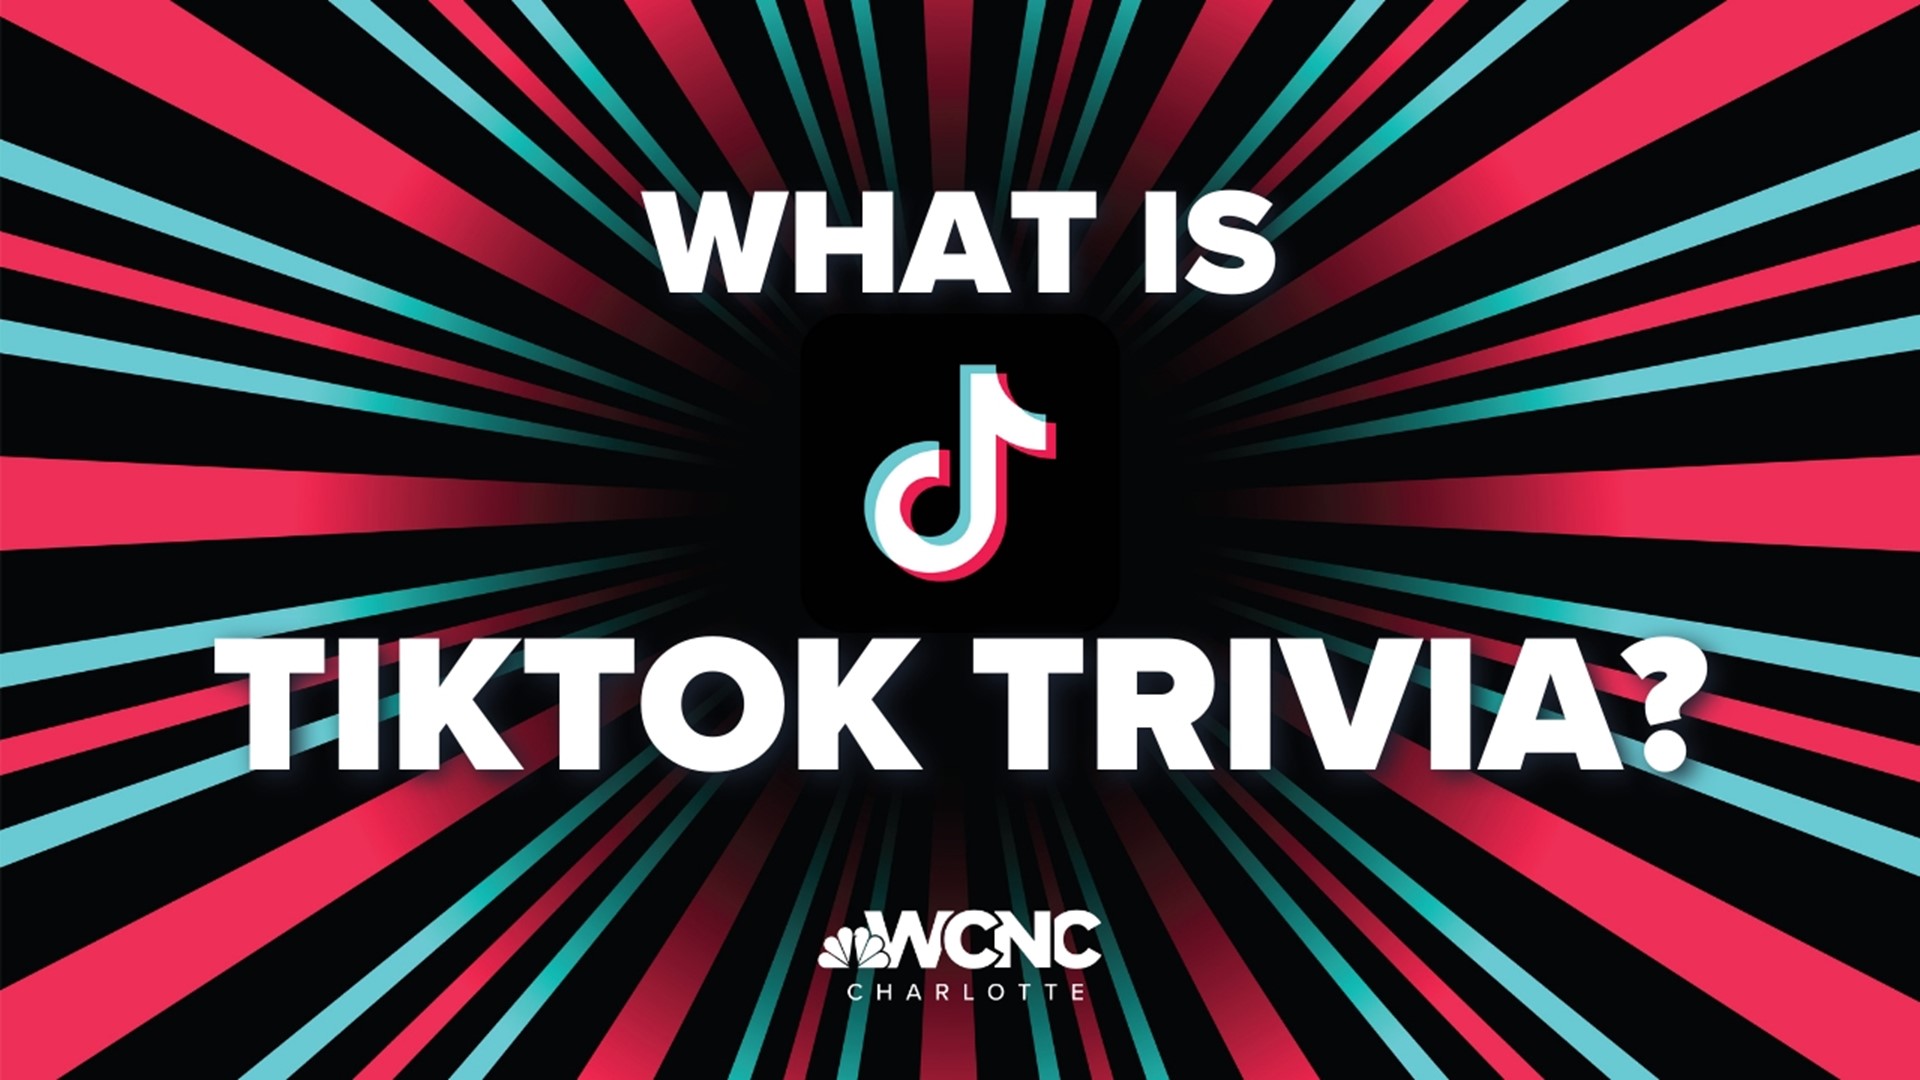 TikTok Trivia How answering questions can win cash money